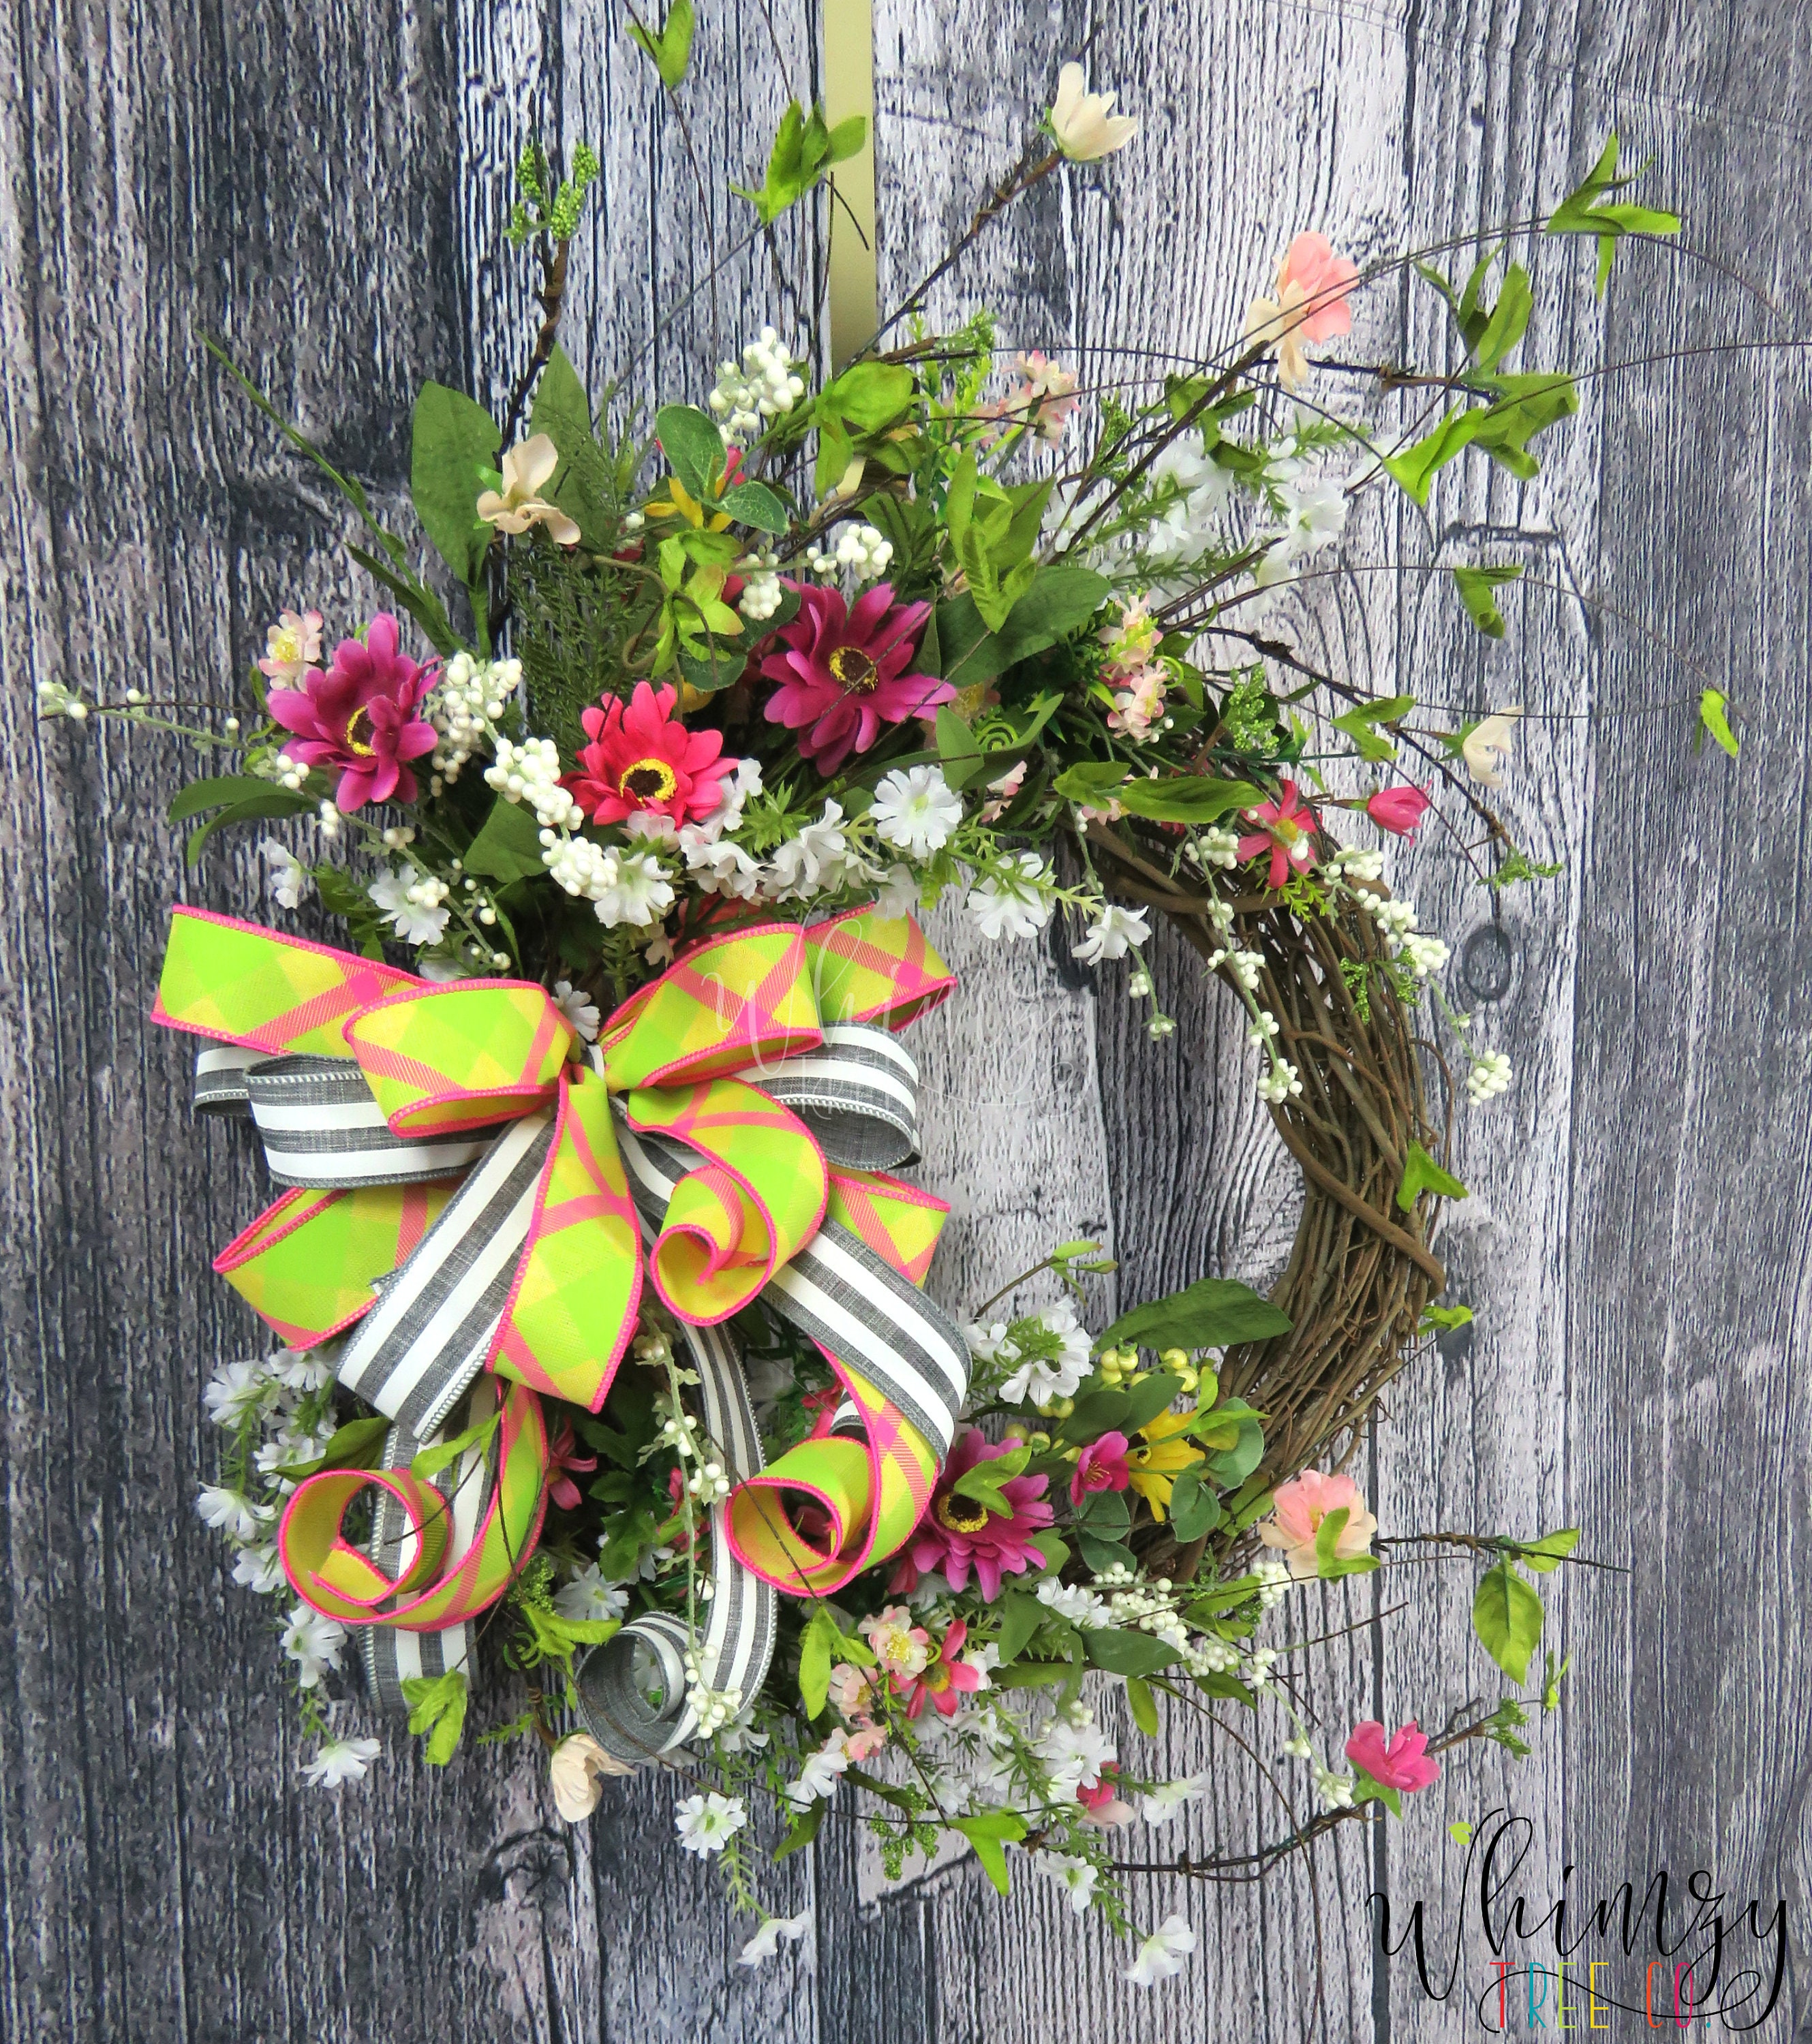 Spring Welcome Floral Grapevine Wreath - Free Tutorial & Supply List